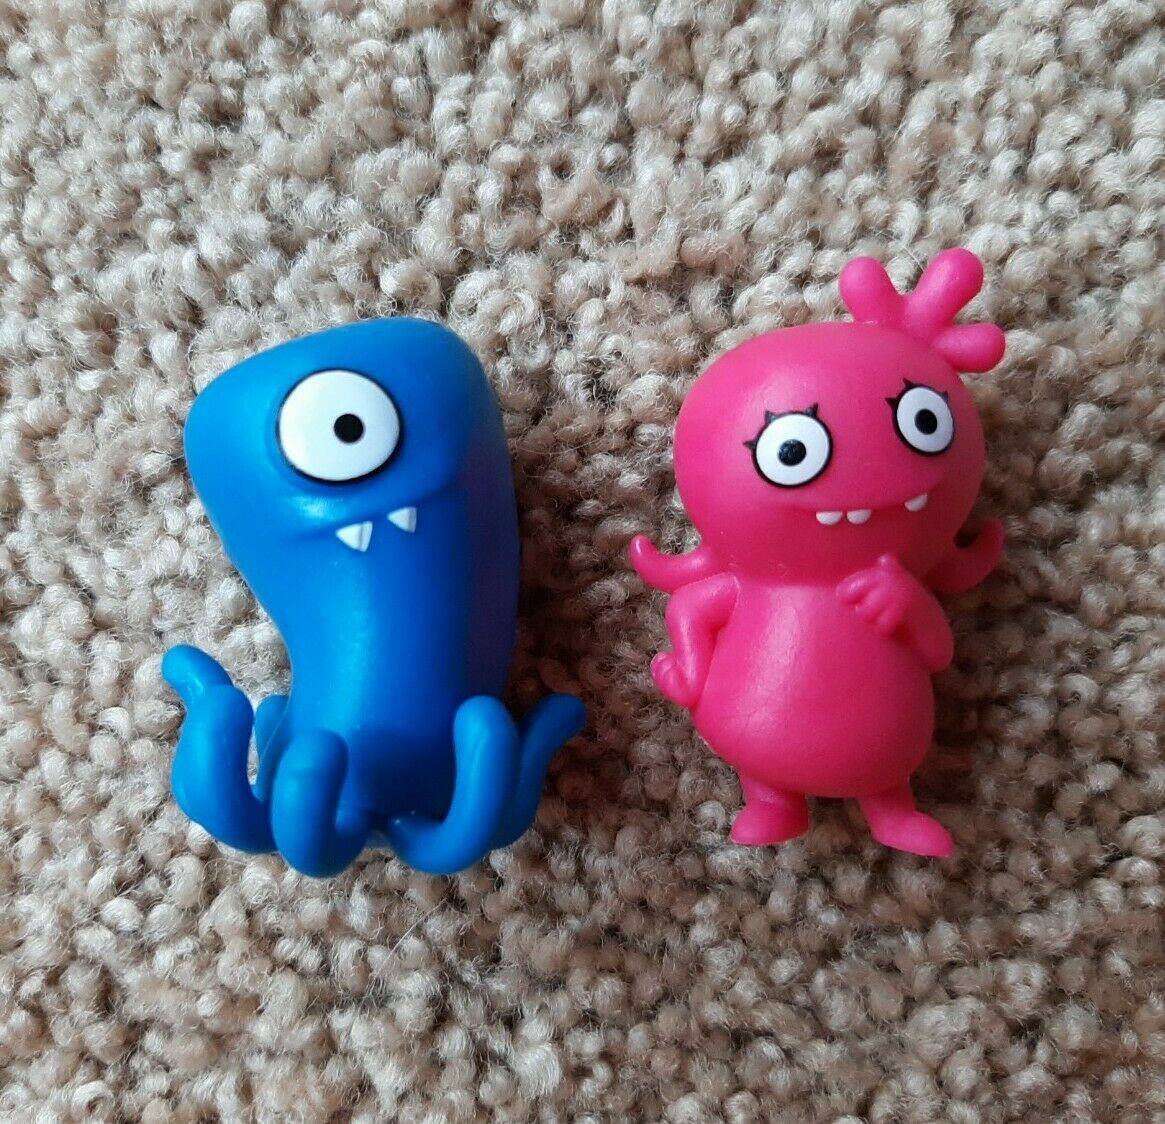 Hasbro 2018 UGLY DOLLS Pink and Blue Figurines